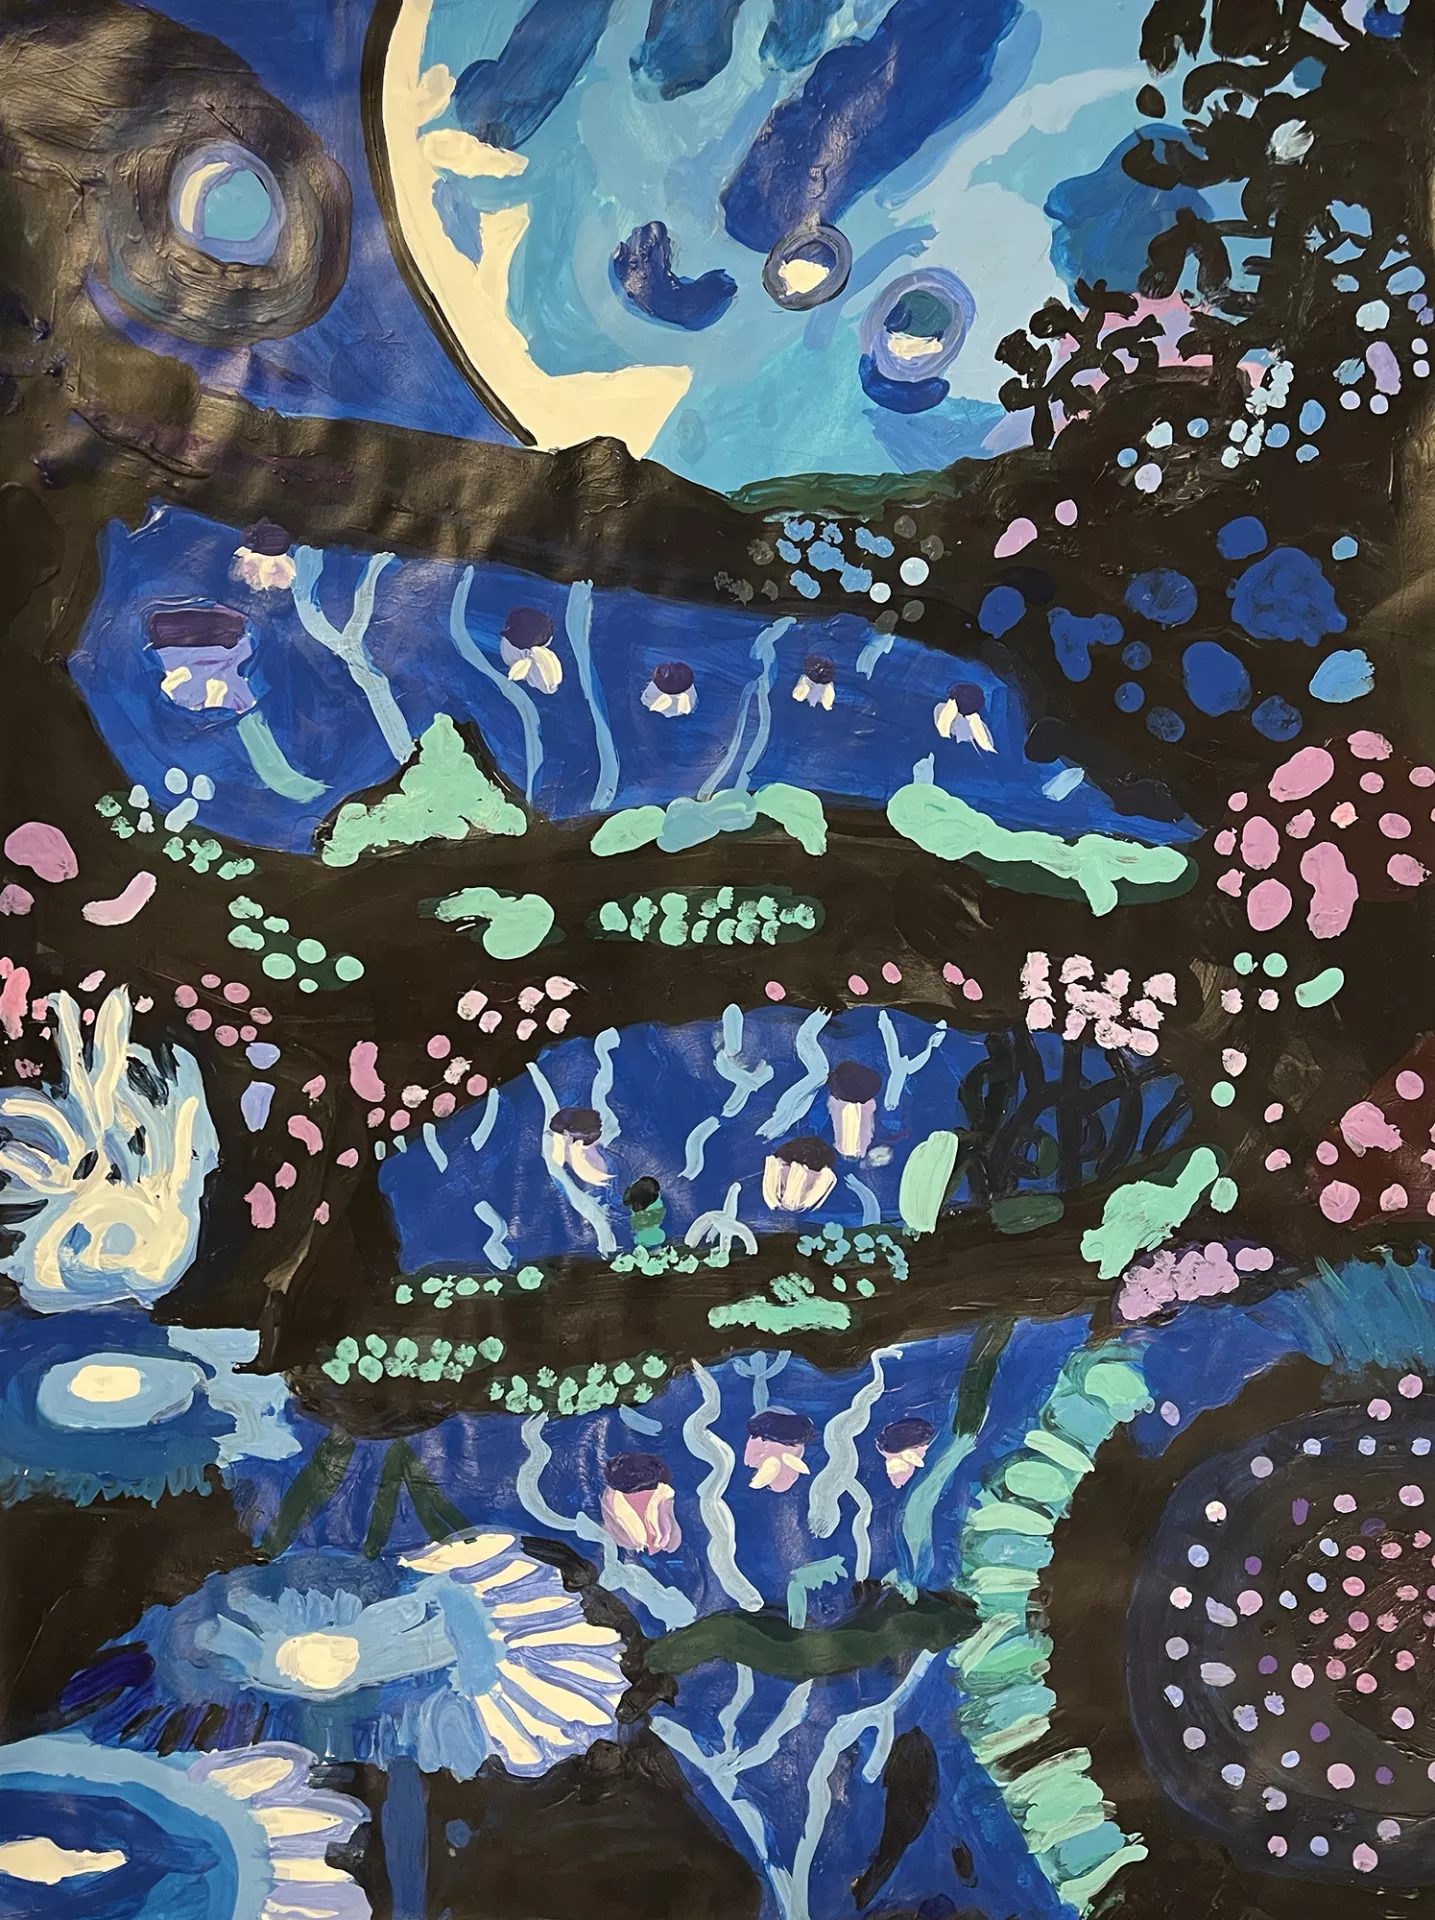 Chloe Isiah Sacred Tree of the Nighttime, 2020 This is a painting done primarily in blues and black. It shows a night scene of watery pools and flowers with a big moon in the sky. The picture has a flattened perspective and depicts everything up close, including the craters on the moon, the reflections in the water, the petals of the flowers, and details of pink and green.  Acrylic on paper, 24” x 18”